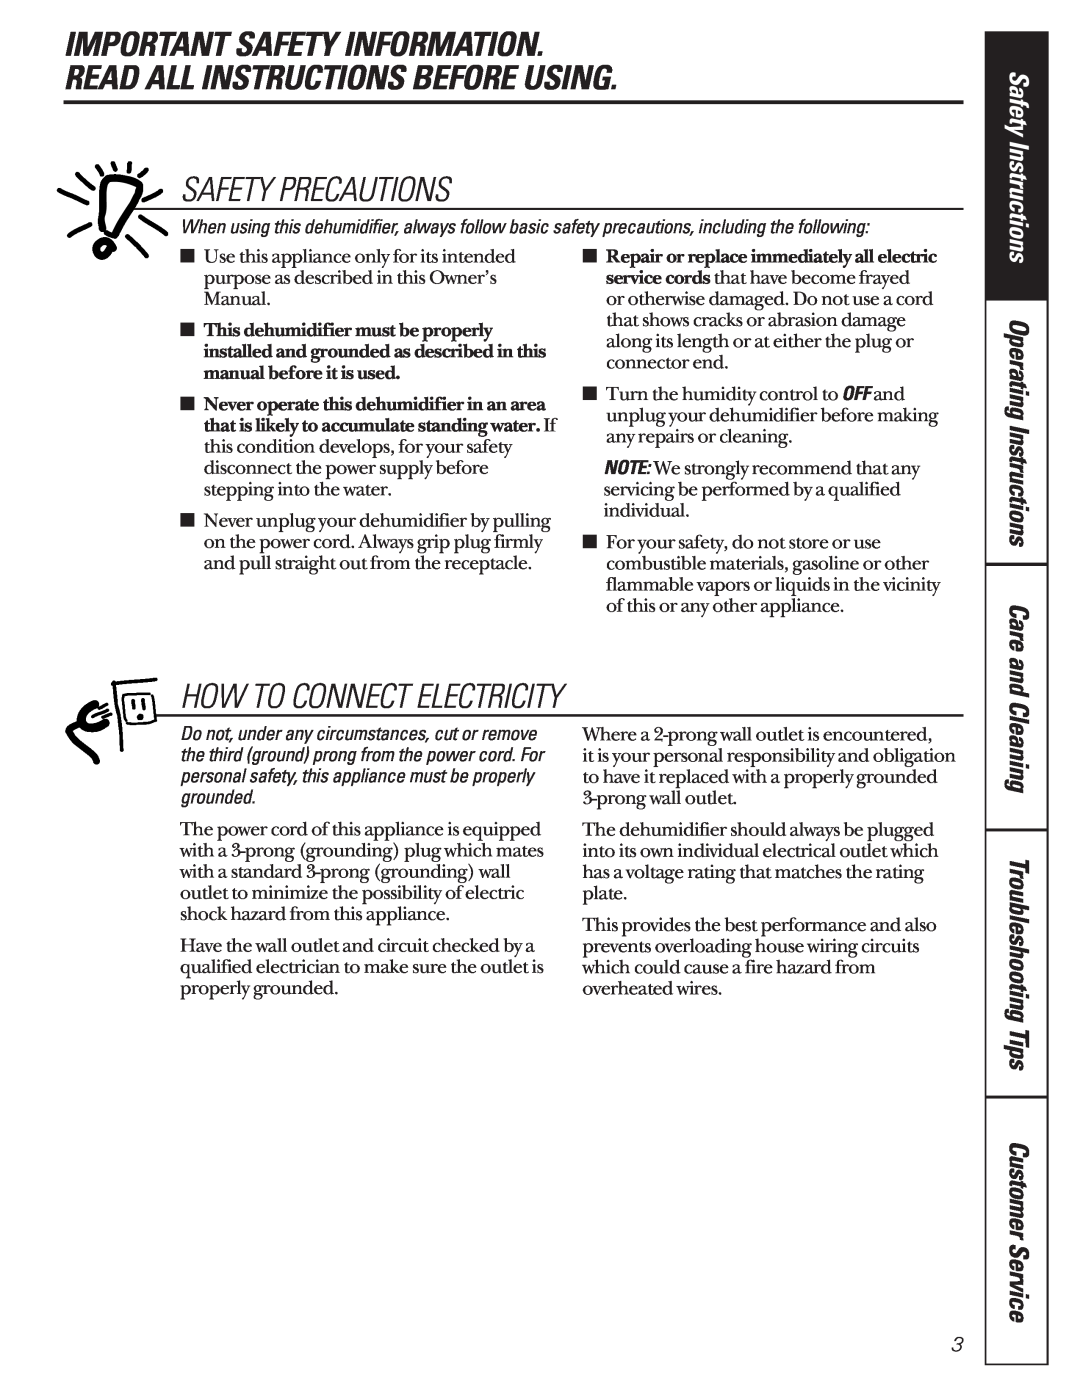 GE AHG50, AHG25 Important Safety Information, Read All Instructions Before Using, Safety Precautions, Customer Service 